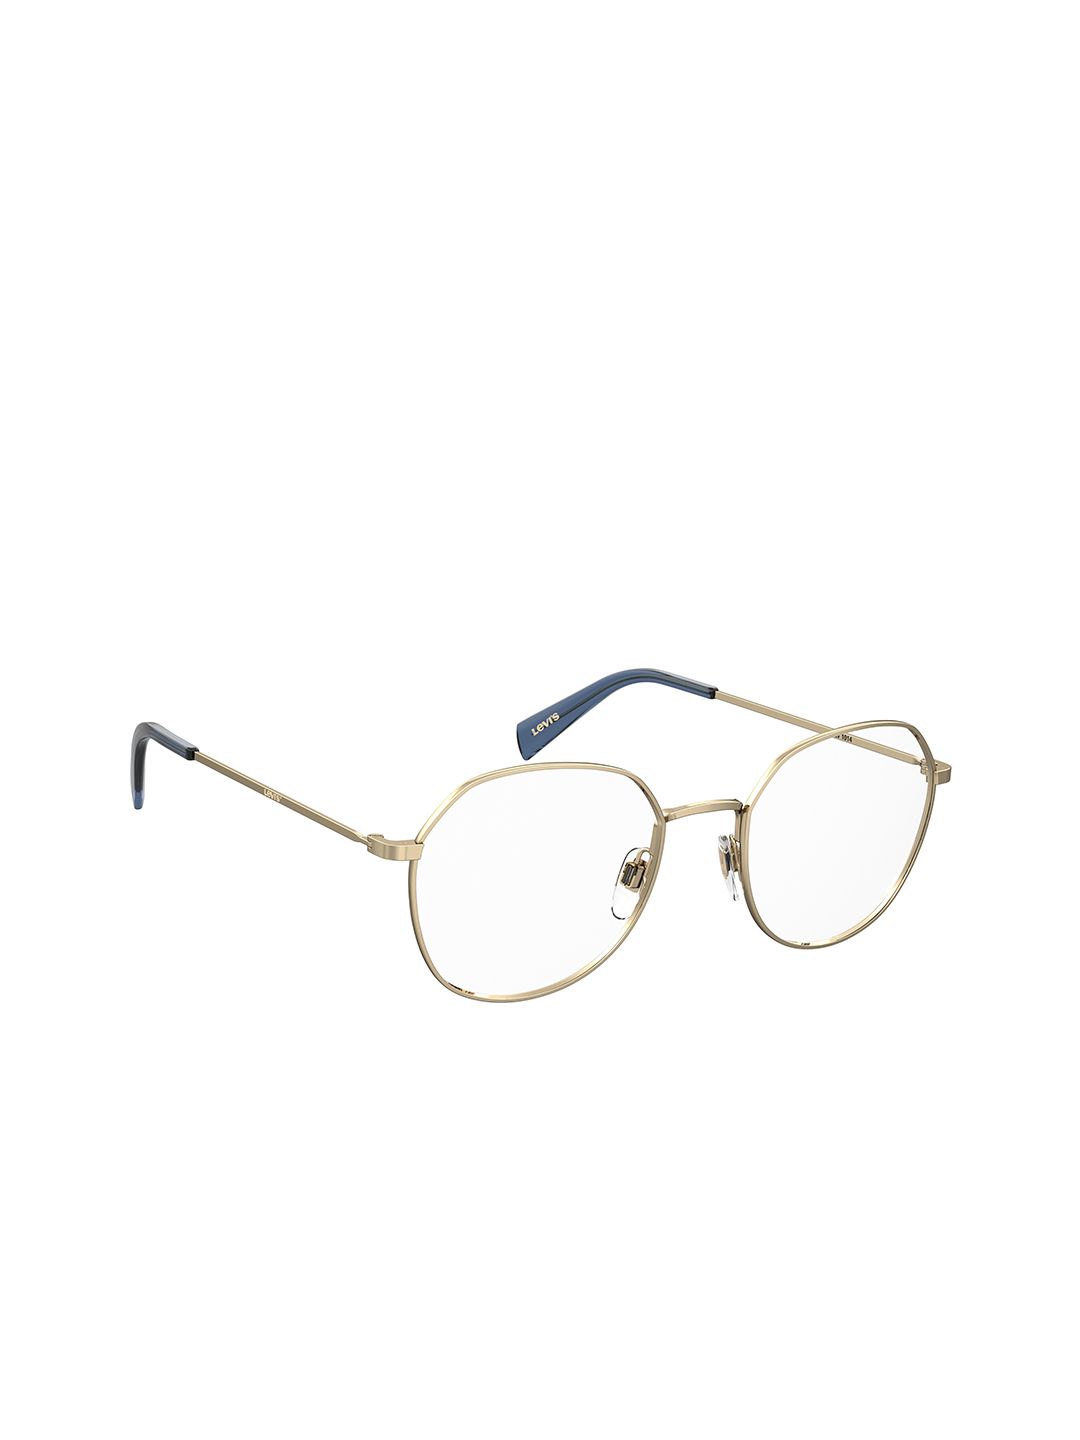 Levis Unisex Clear Lens & Gold-Toned Round Sunglasses with Polarised Lens Price in India